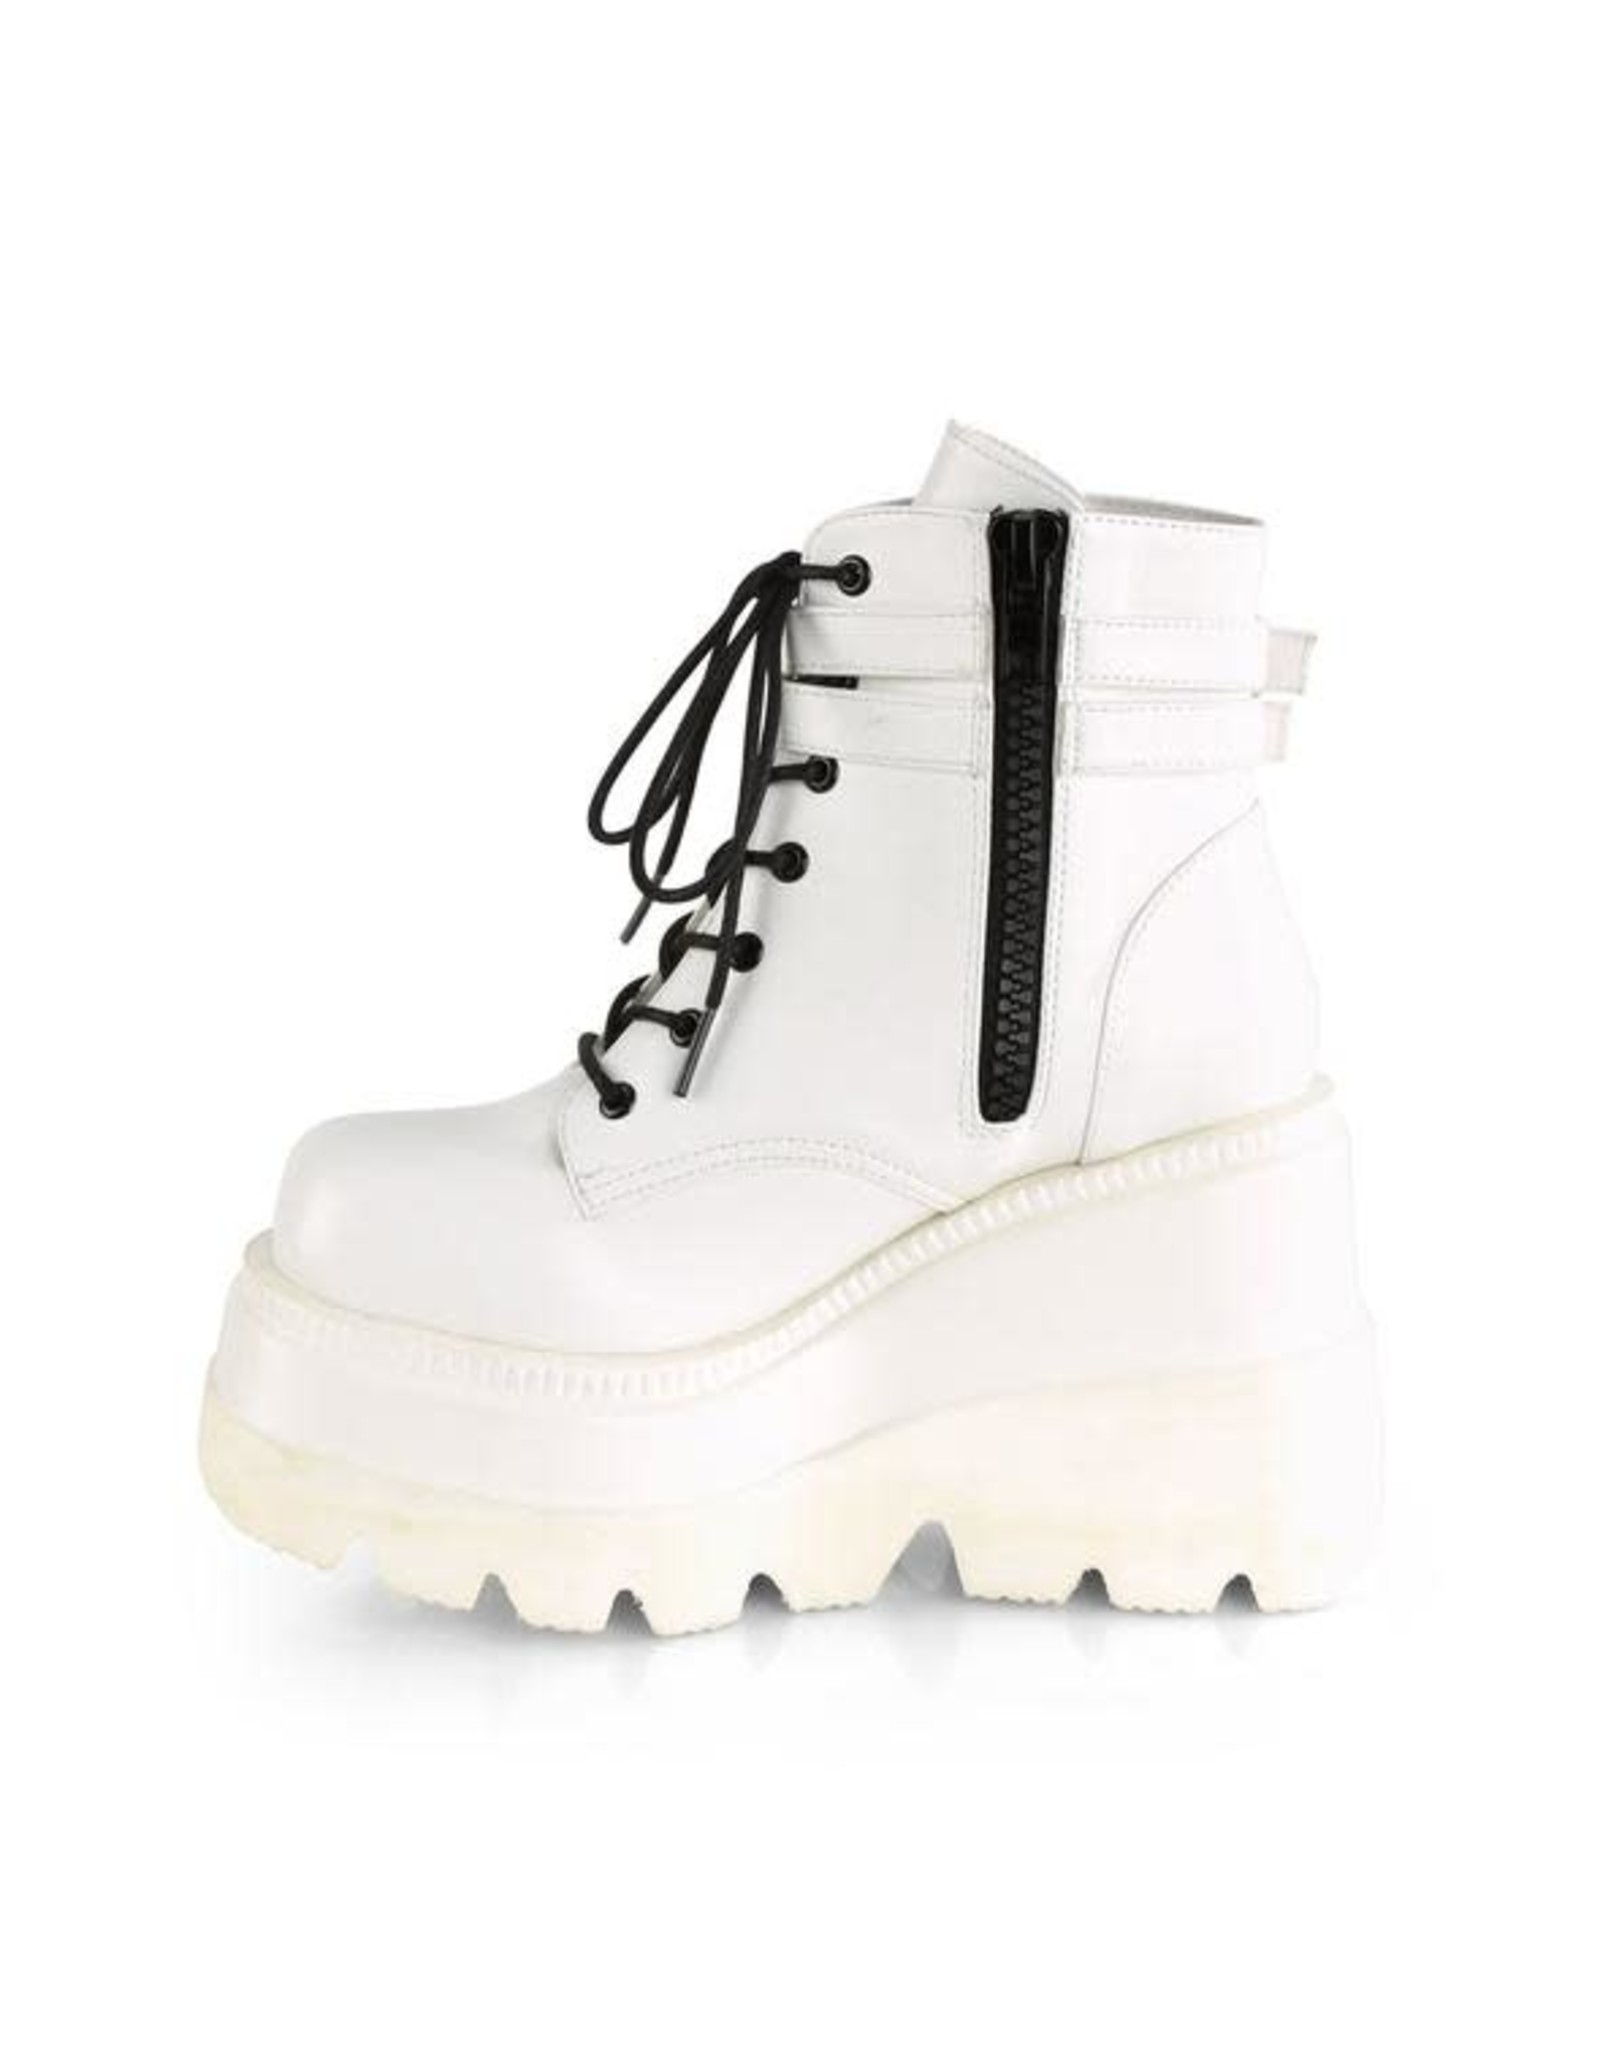 DEMONIA SHAKER-52 4 1/2" Wedge Platform White Vegan Leather Boot w/ Double Buckled Ankle Straps, Inside Zip Closure D38VW